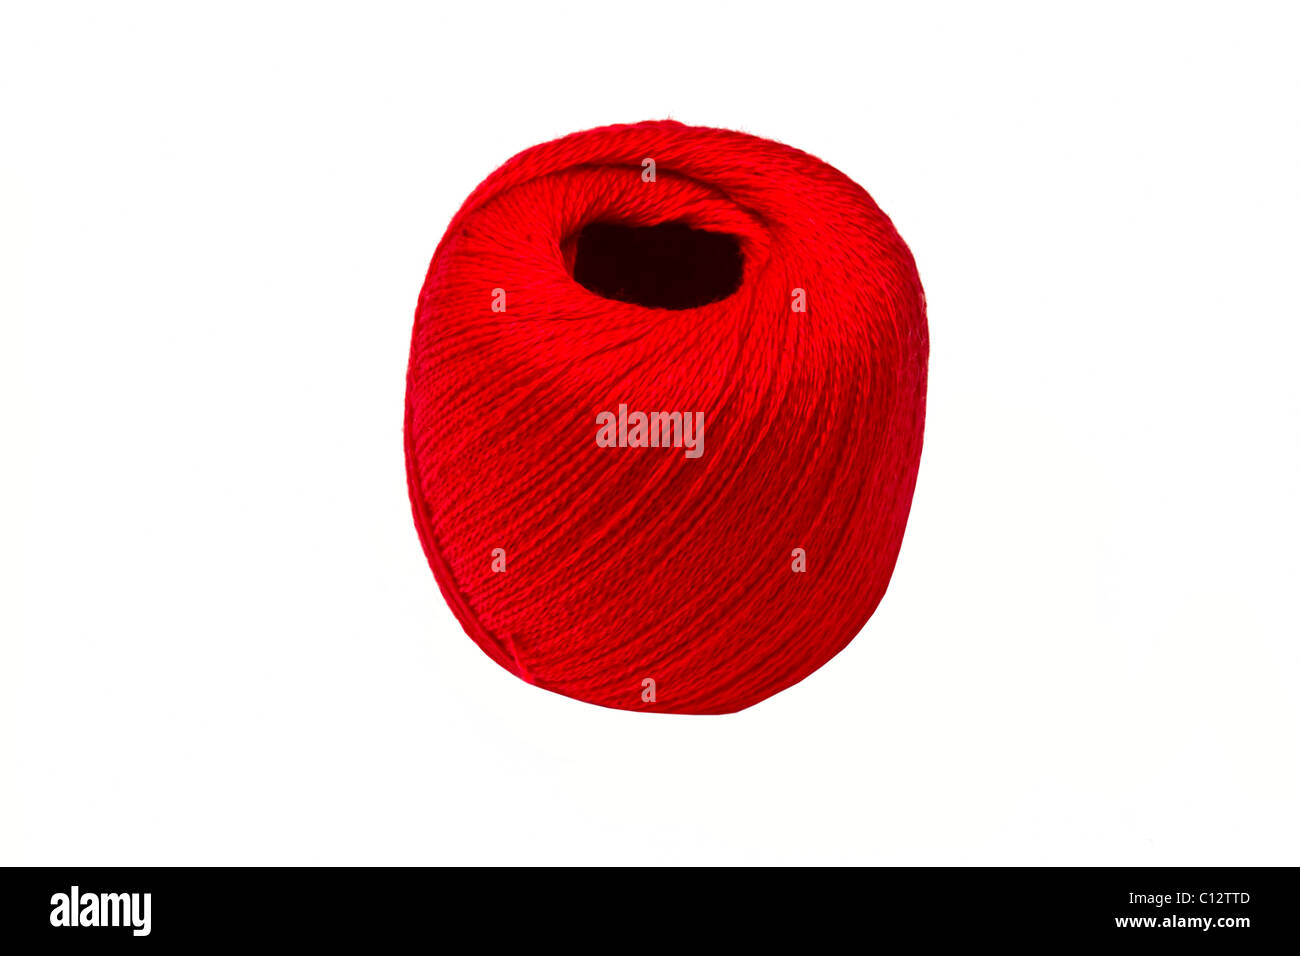 Red thread, string as amulet for wrist isolated on white. Red bracelet with  knots. Top view Stock Photo - Alamy